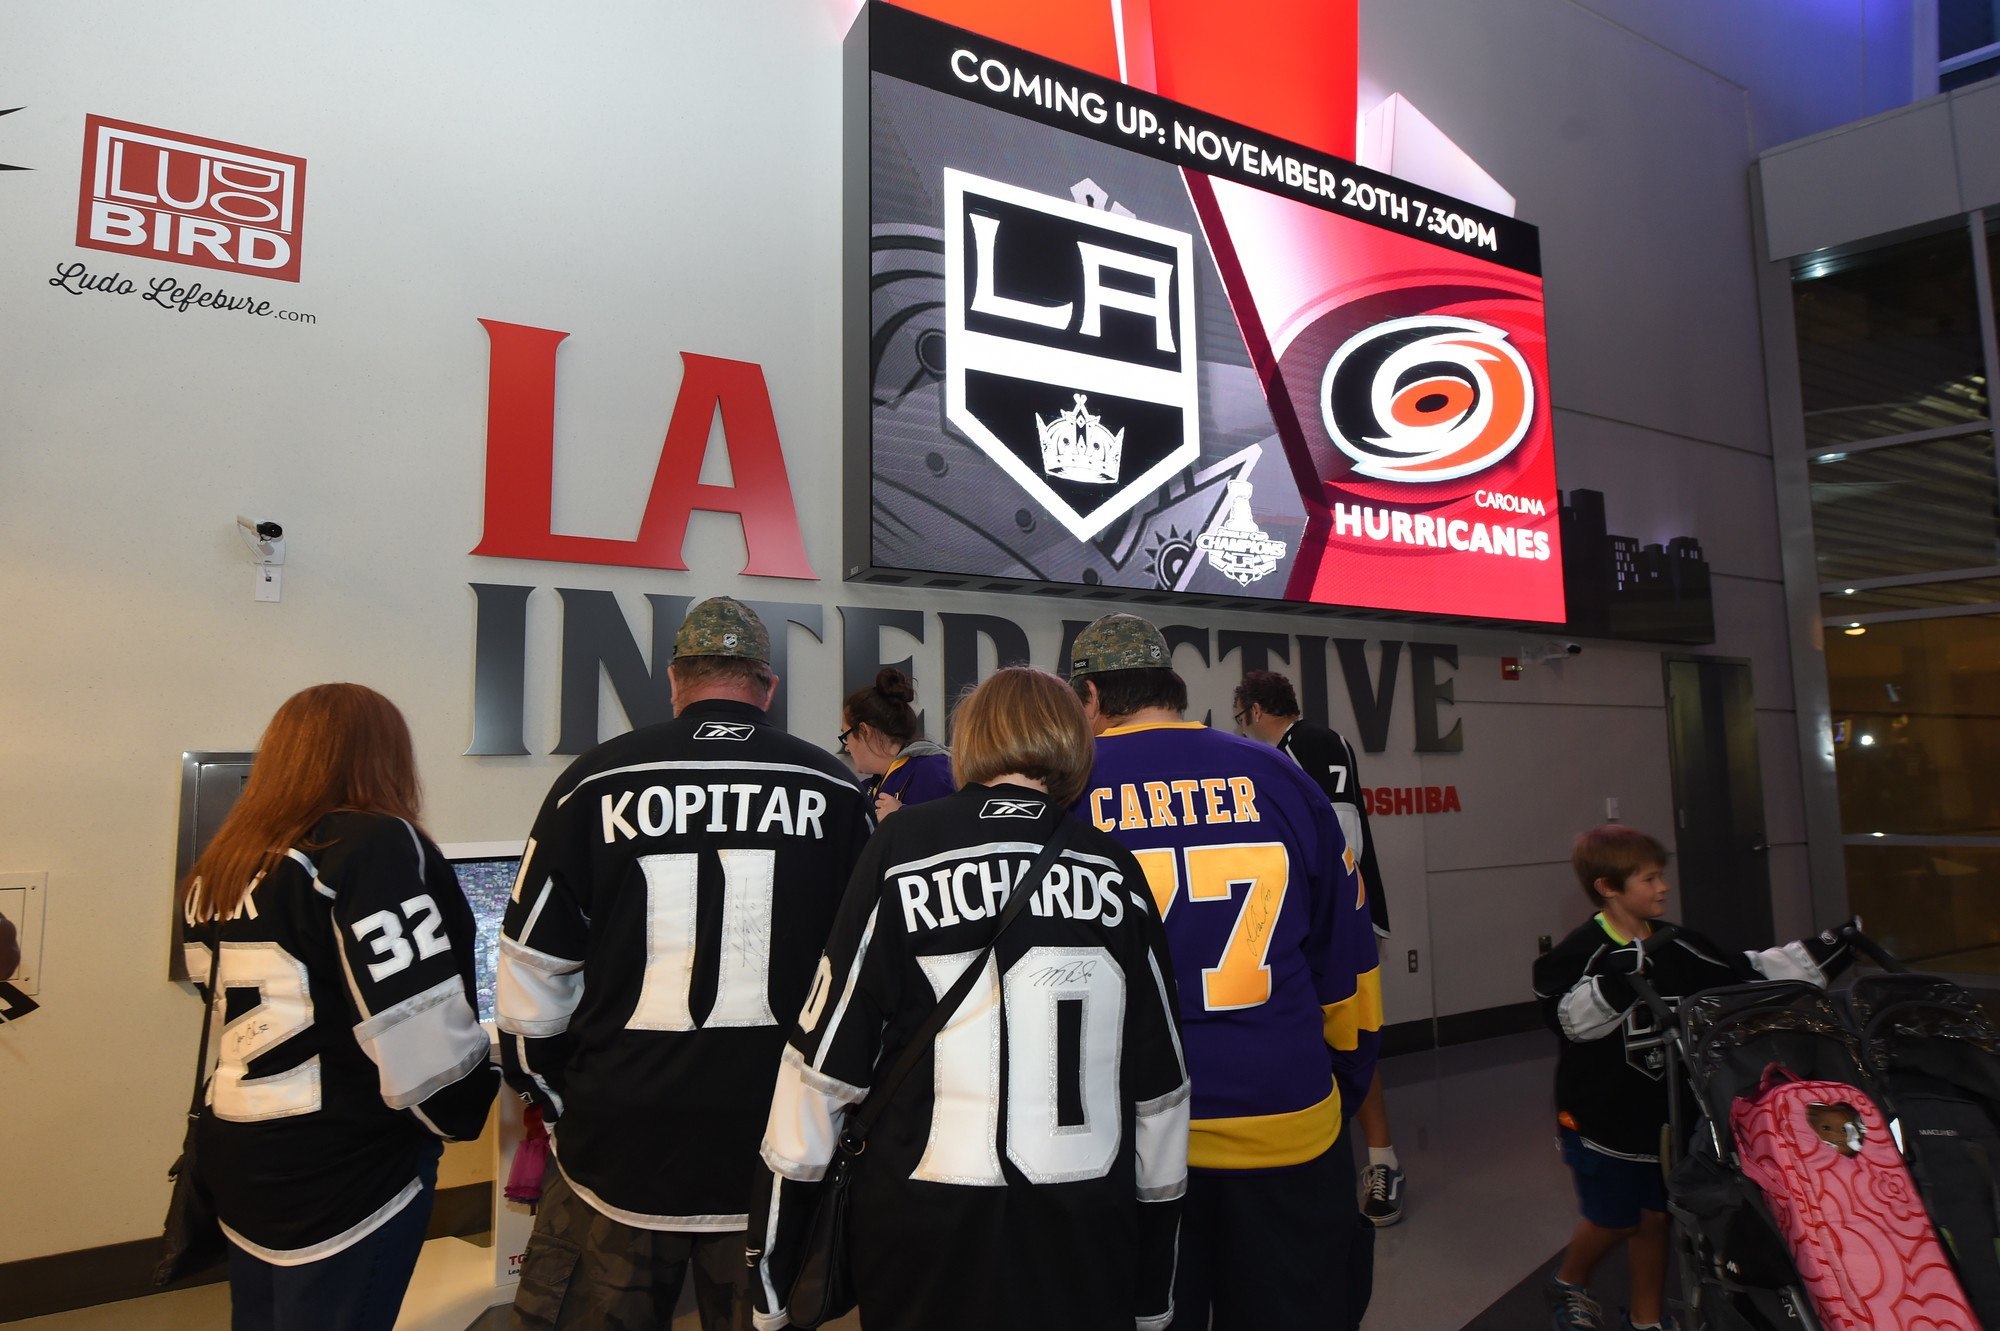 AEG hosts a ribbon cutting ceremony for brand new STAPLES center attraction LA Interactive powered by Toshiba on November 8, at STAPLES center in Los Angeles California. (Photo by Adam Pantozzi/AEG via Bernstein Associates, Inc.)